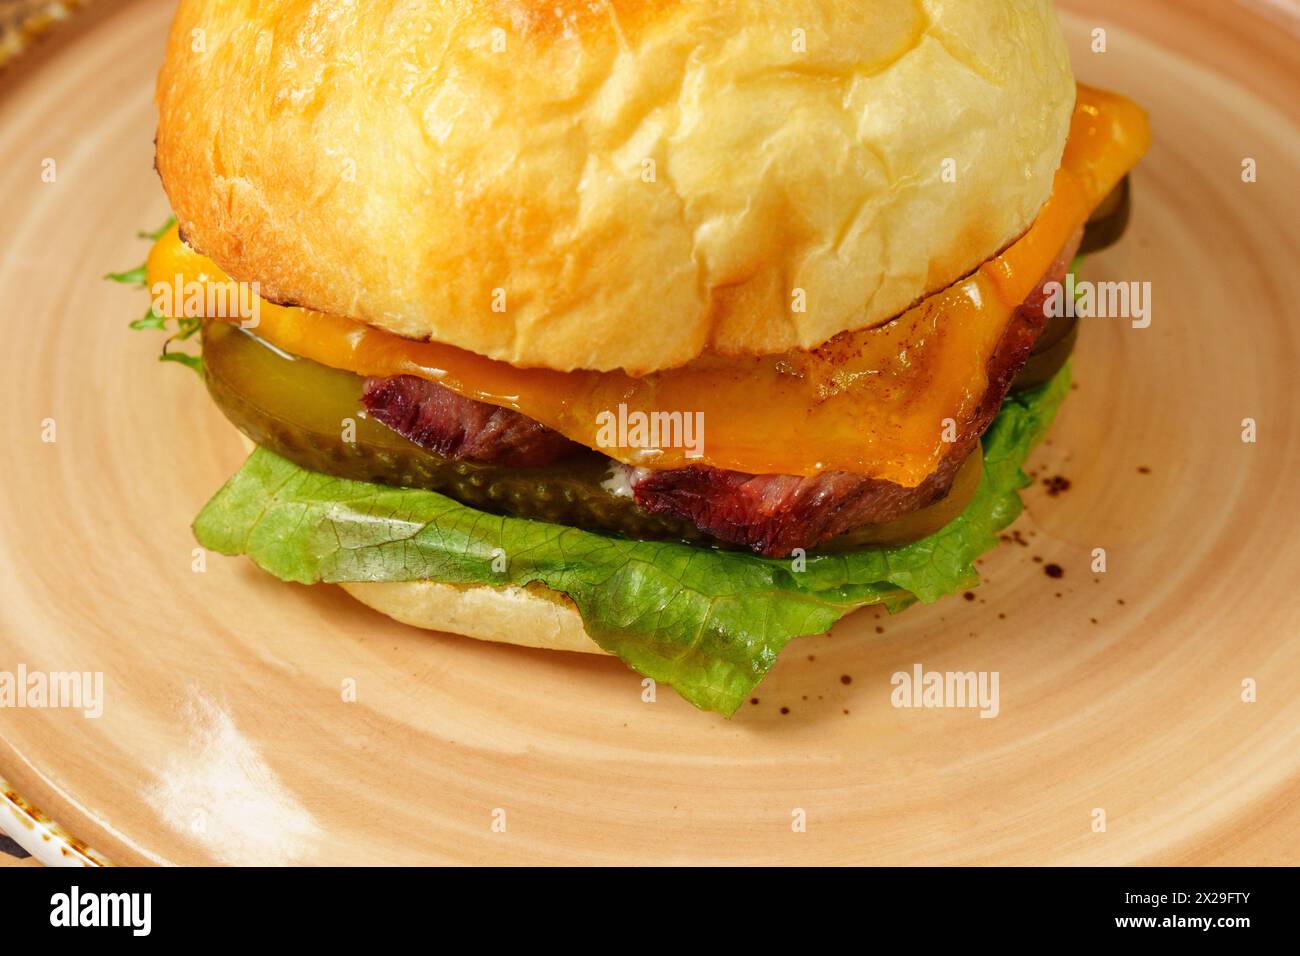 Cheeseburger is beef patty, melted cheese, fresh lettuce, and ripe tomato are clearly visible. Stock Photo